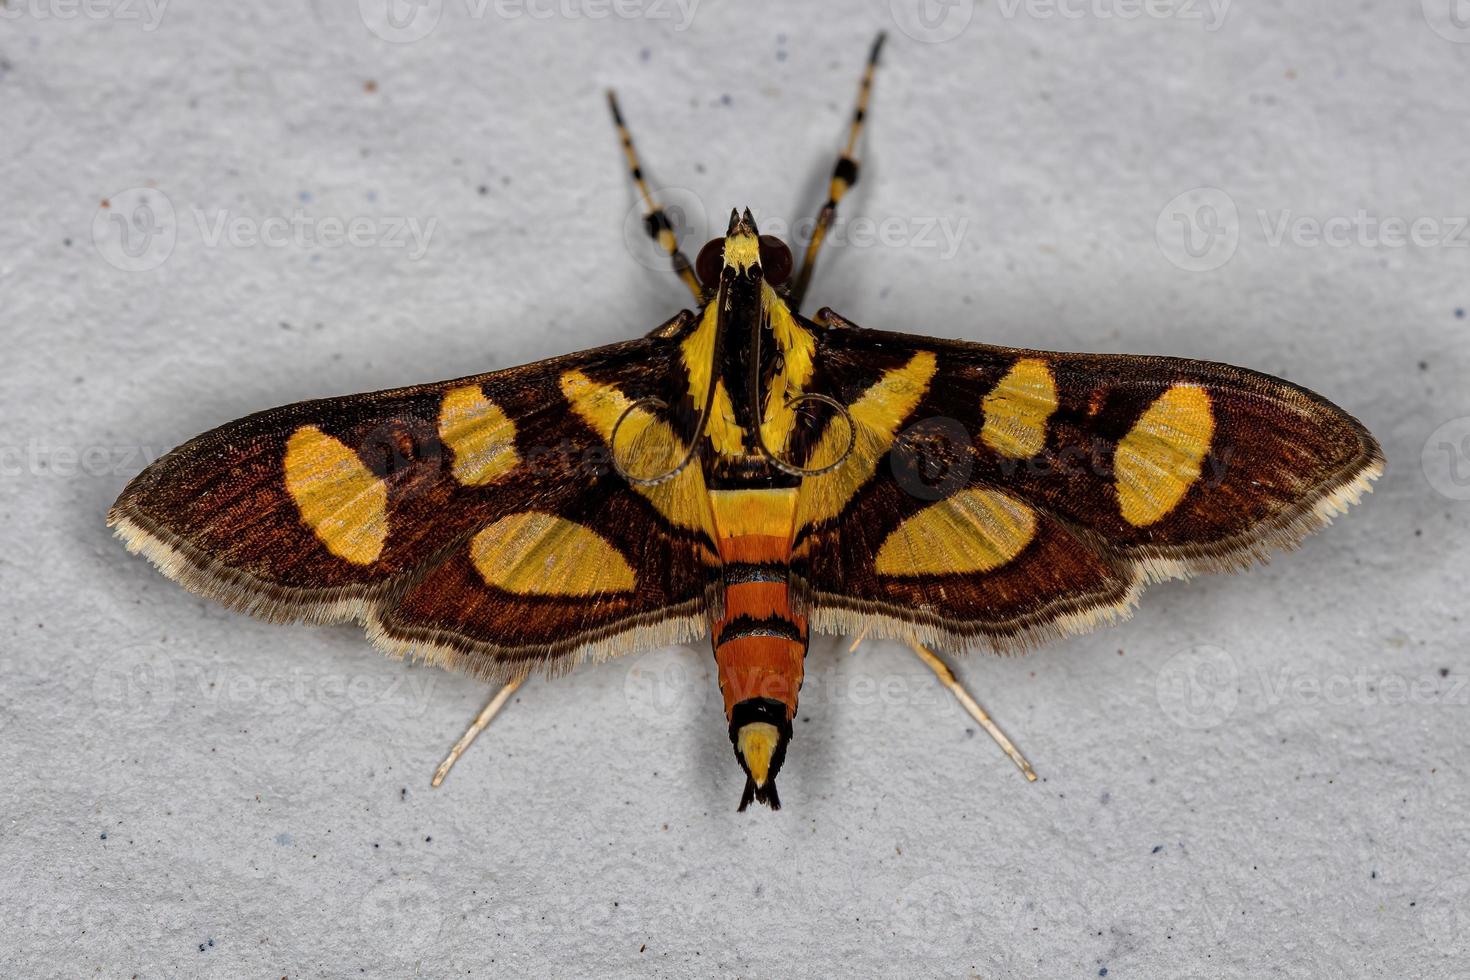 Male Adult Orange-spotted Flower Moth photo